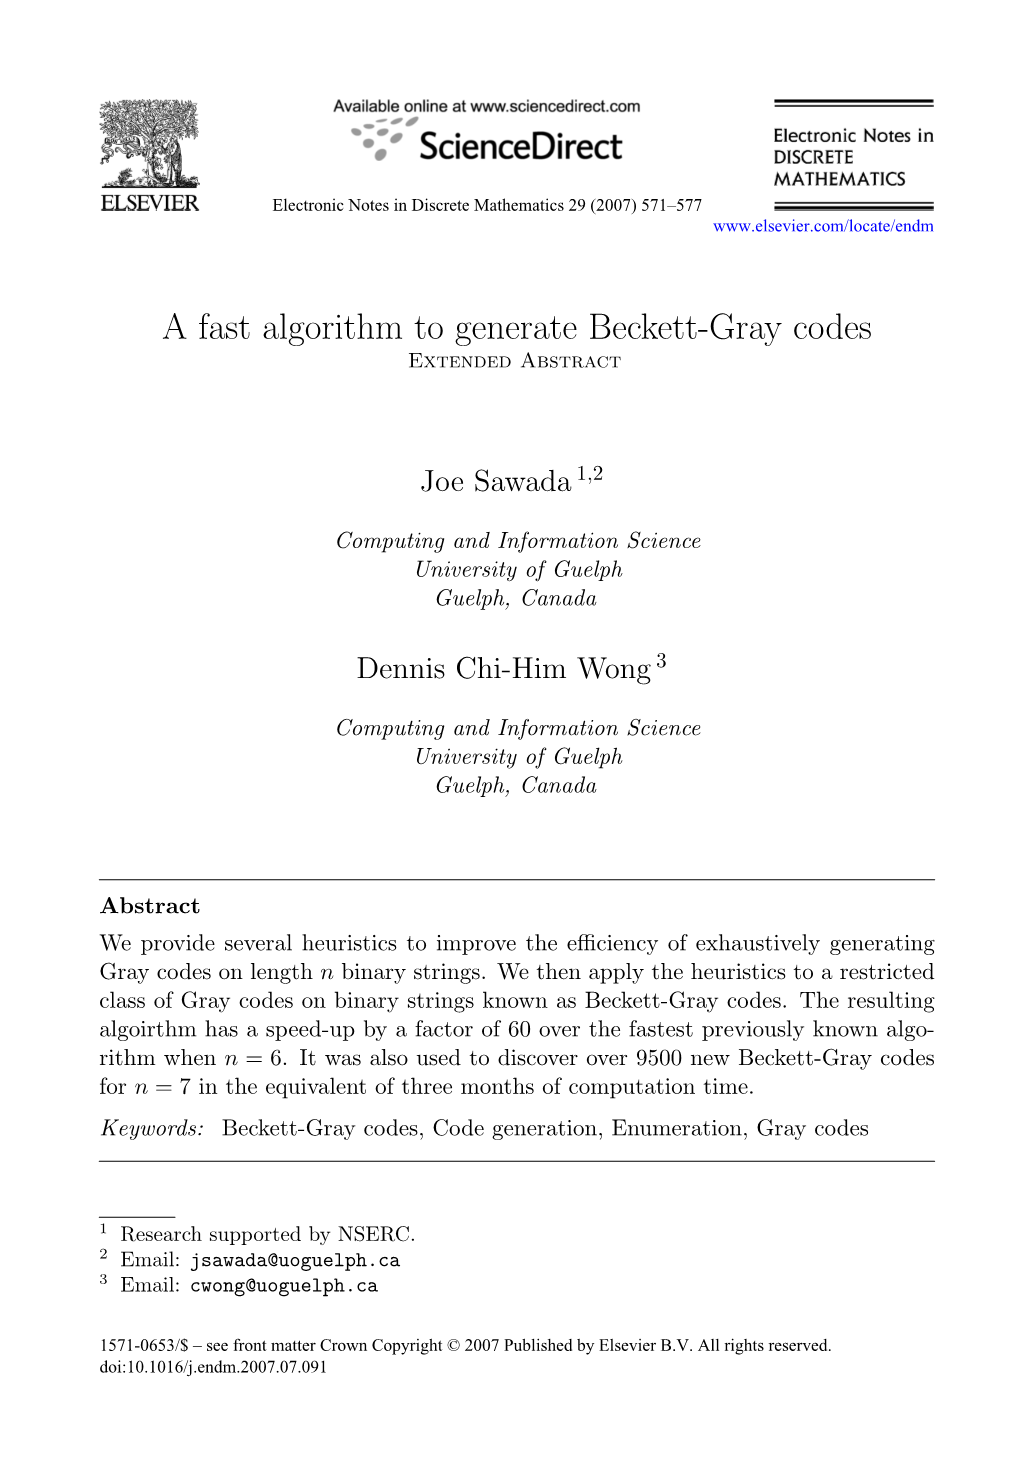 A Fast Algorithm to Generate Beckett-Gray Codes Extended Abstract